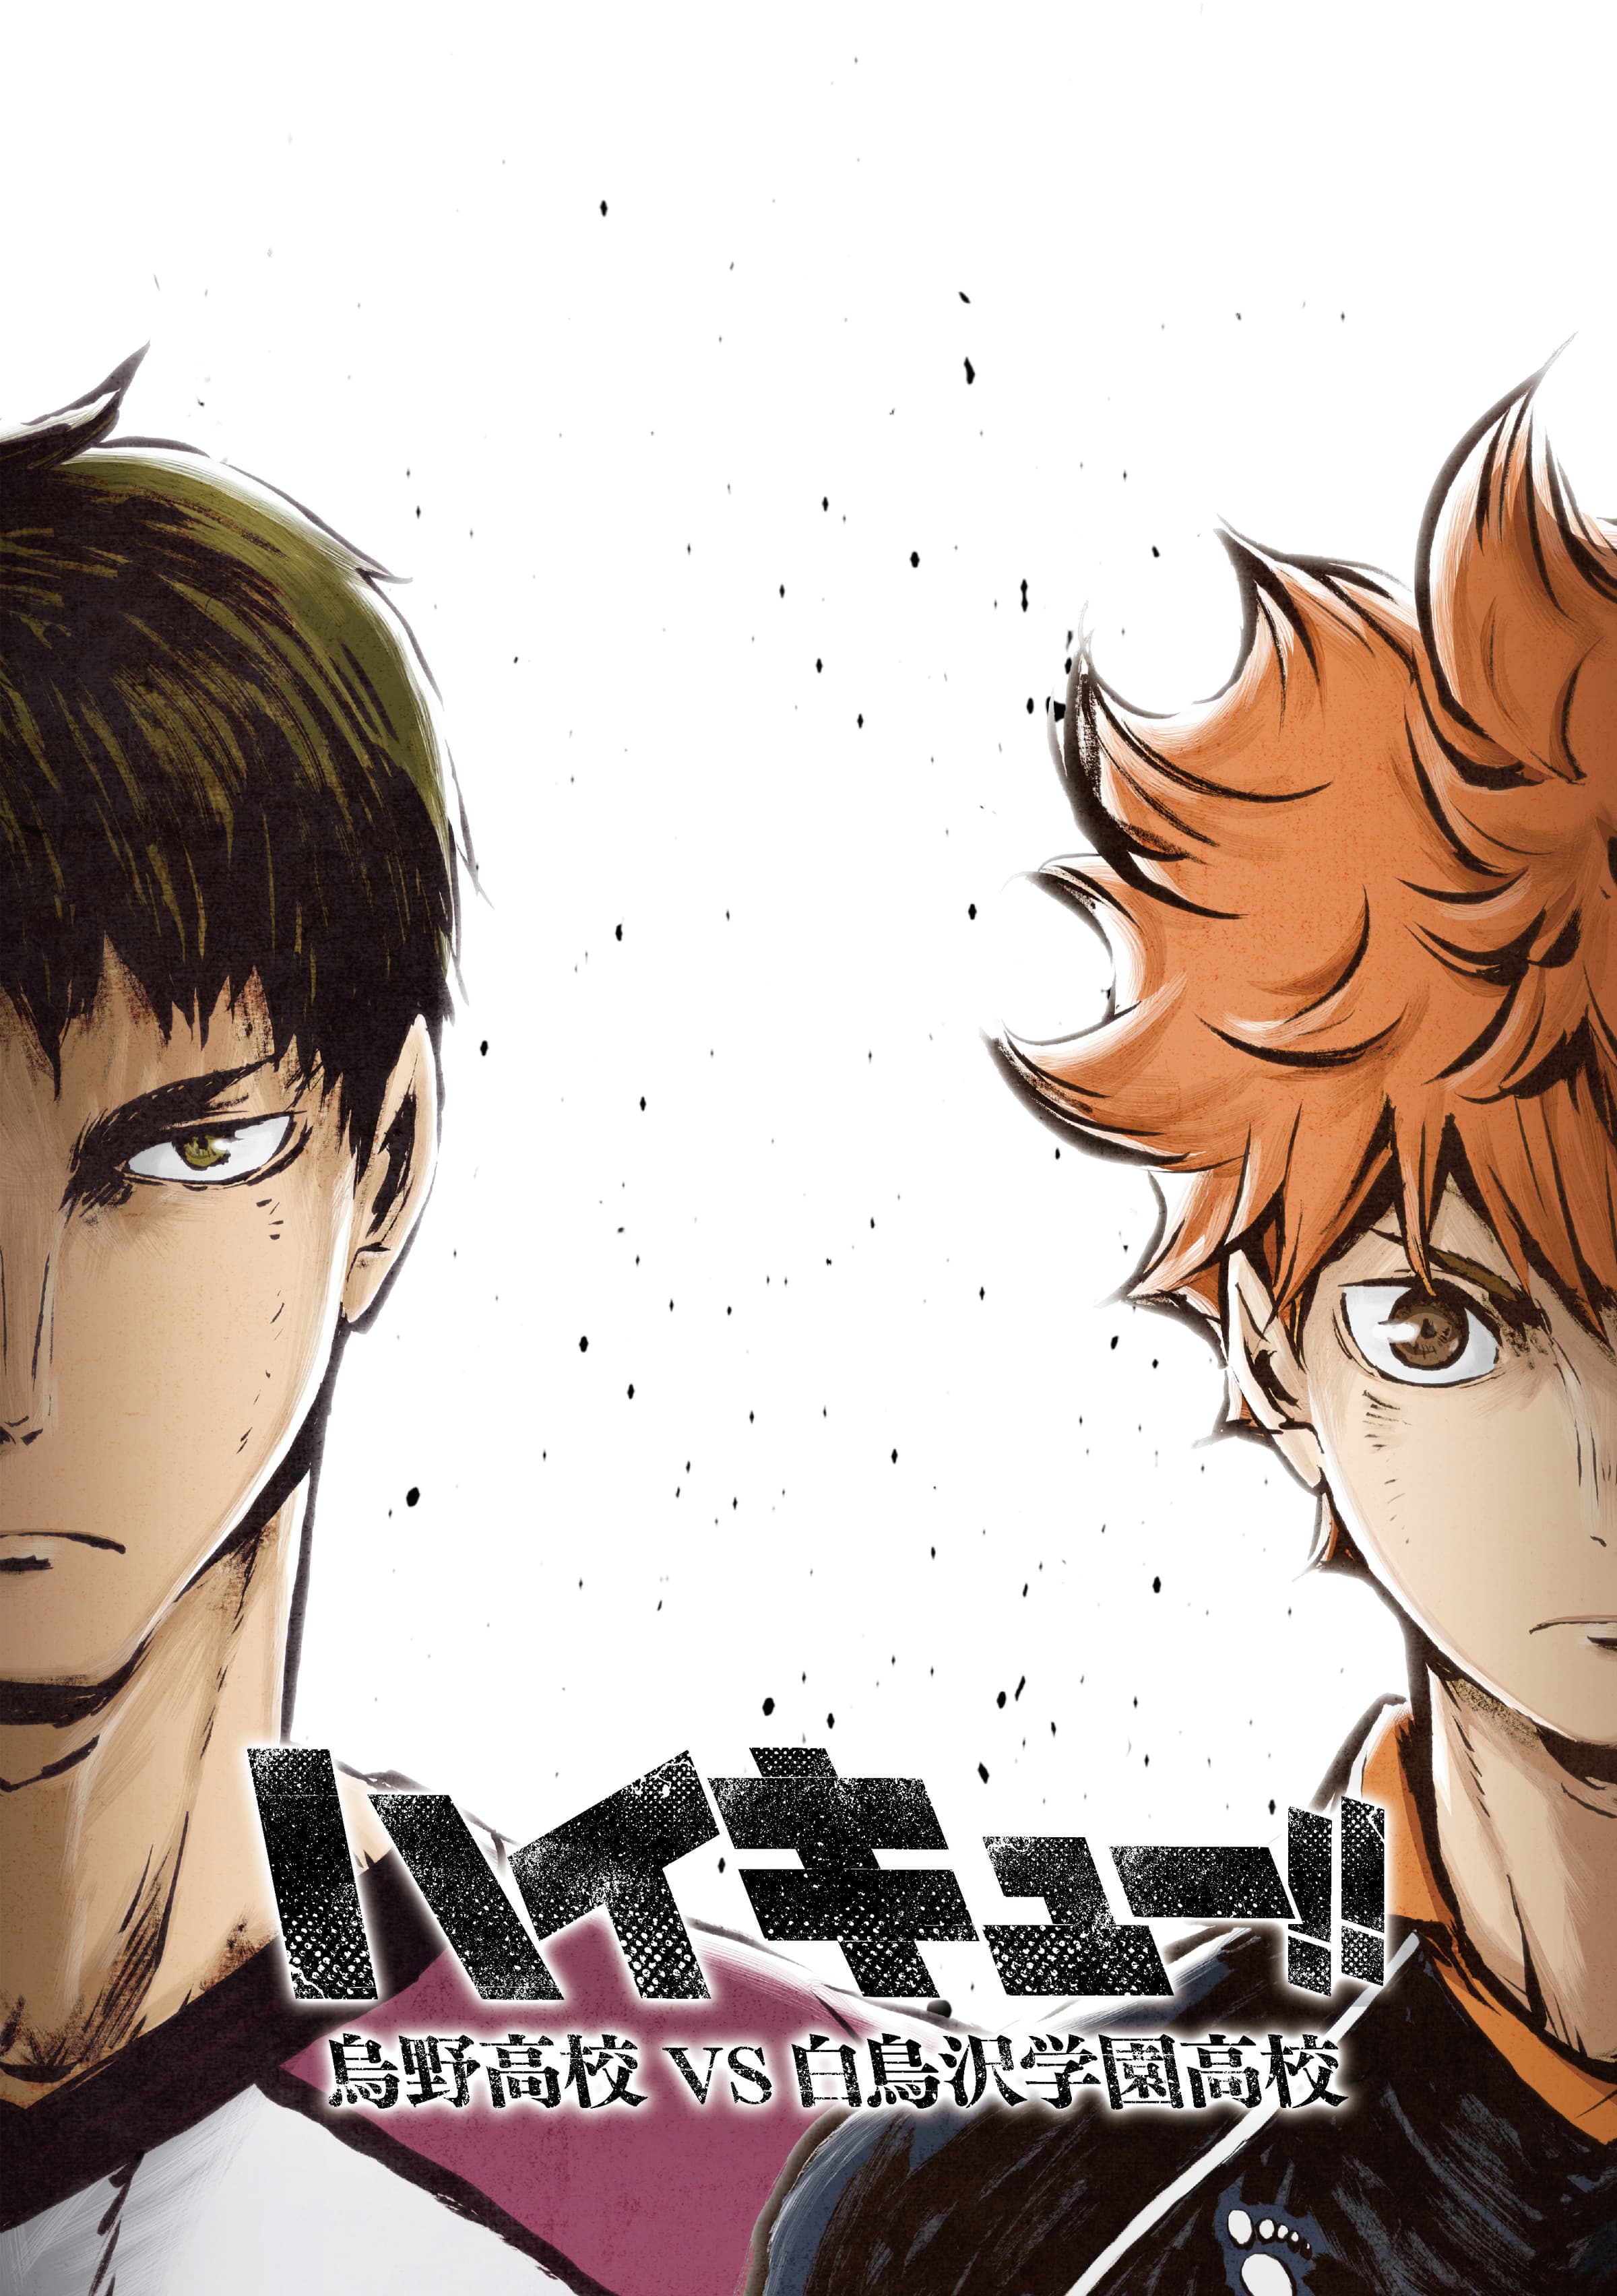 What are the good things about Haikyuu as animation, story, and